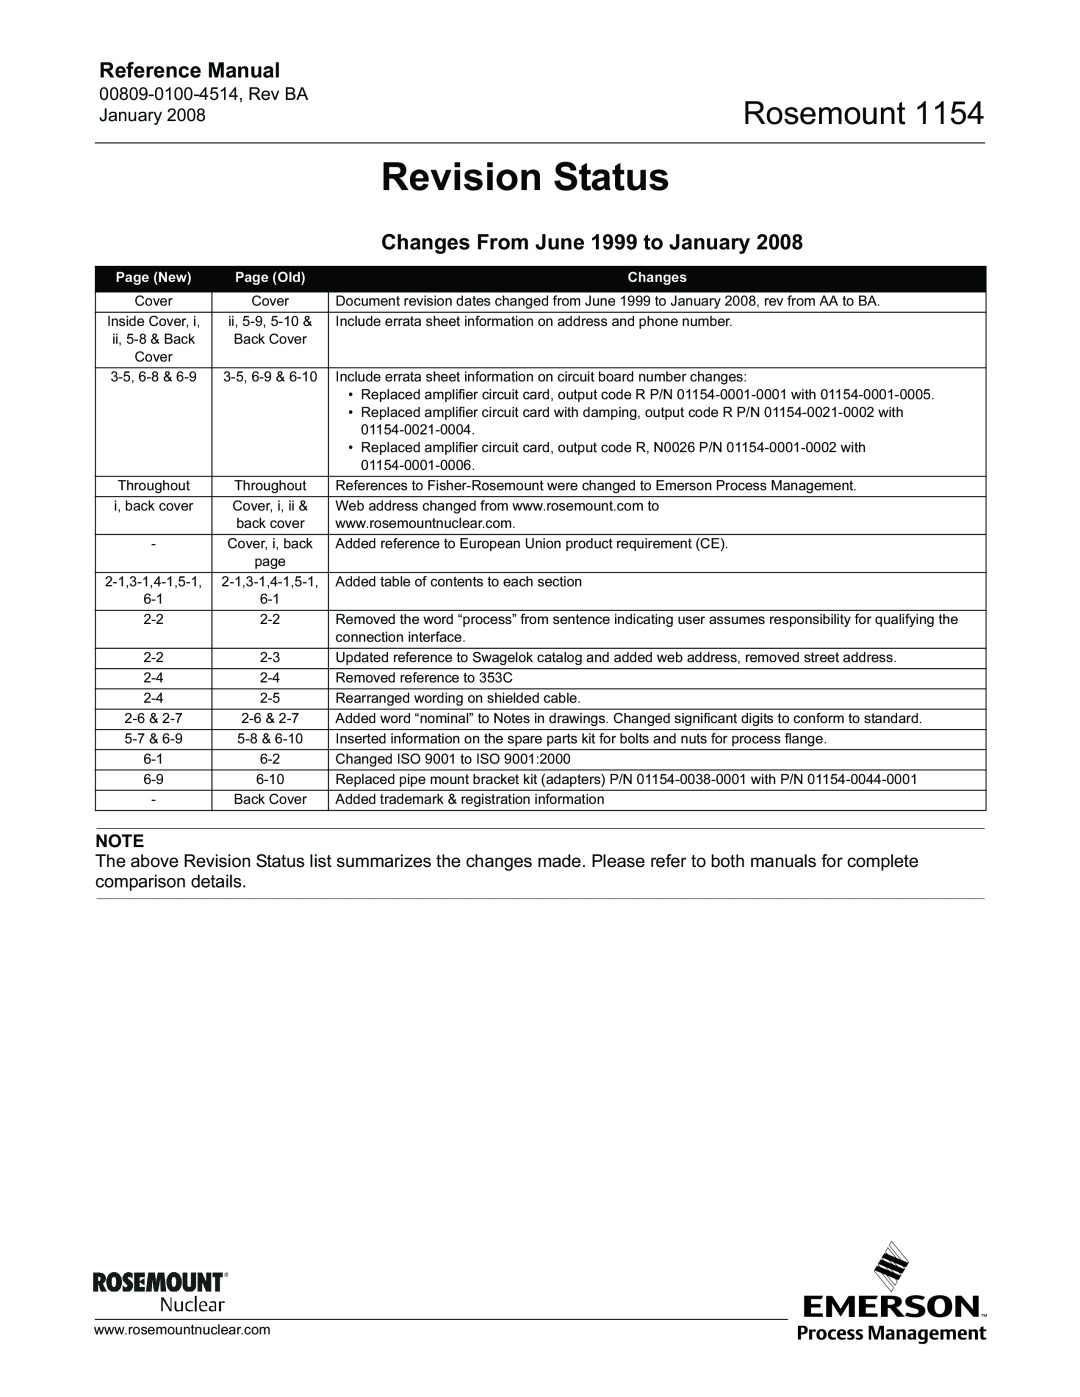 Emerson 1154 manual Revision Status, Changes From June 1999 to January, Rosemount, Reference Manual, Page New, Page Old 